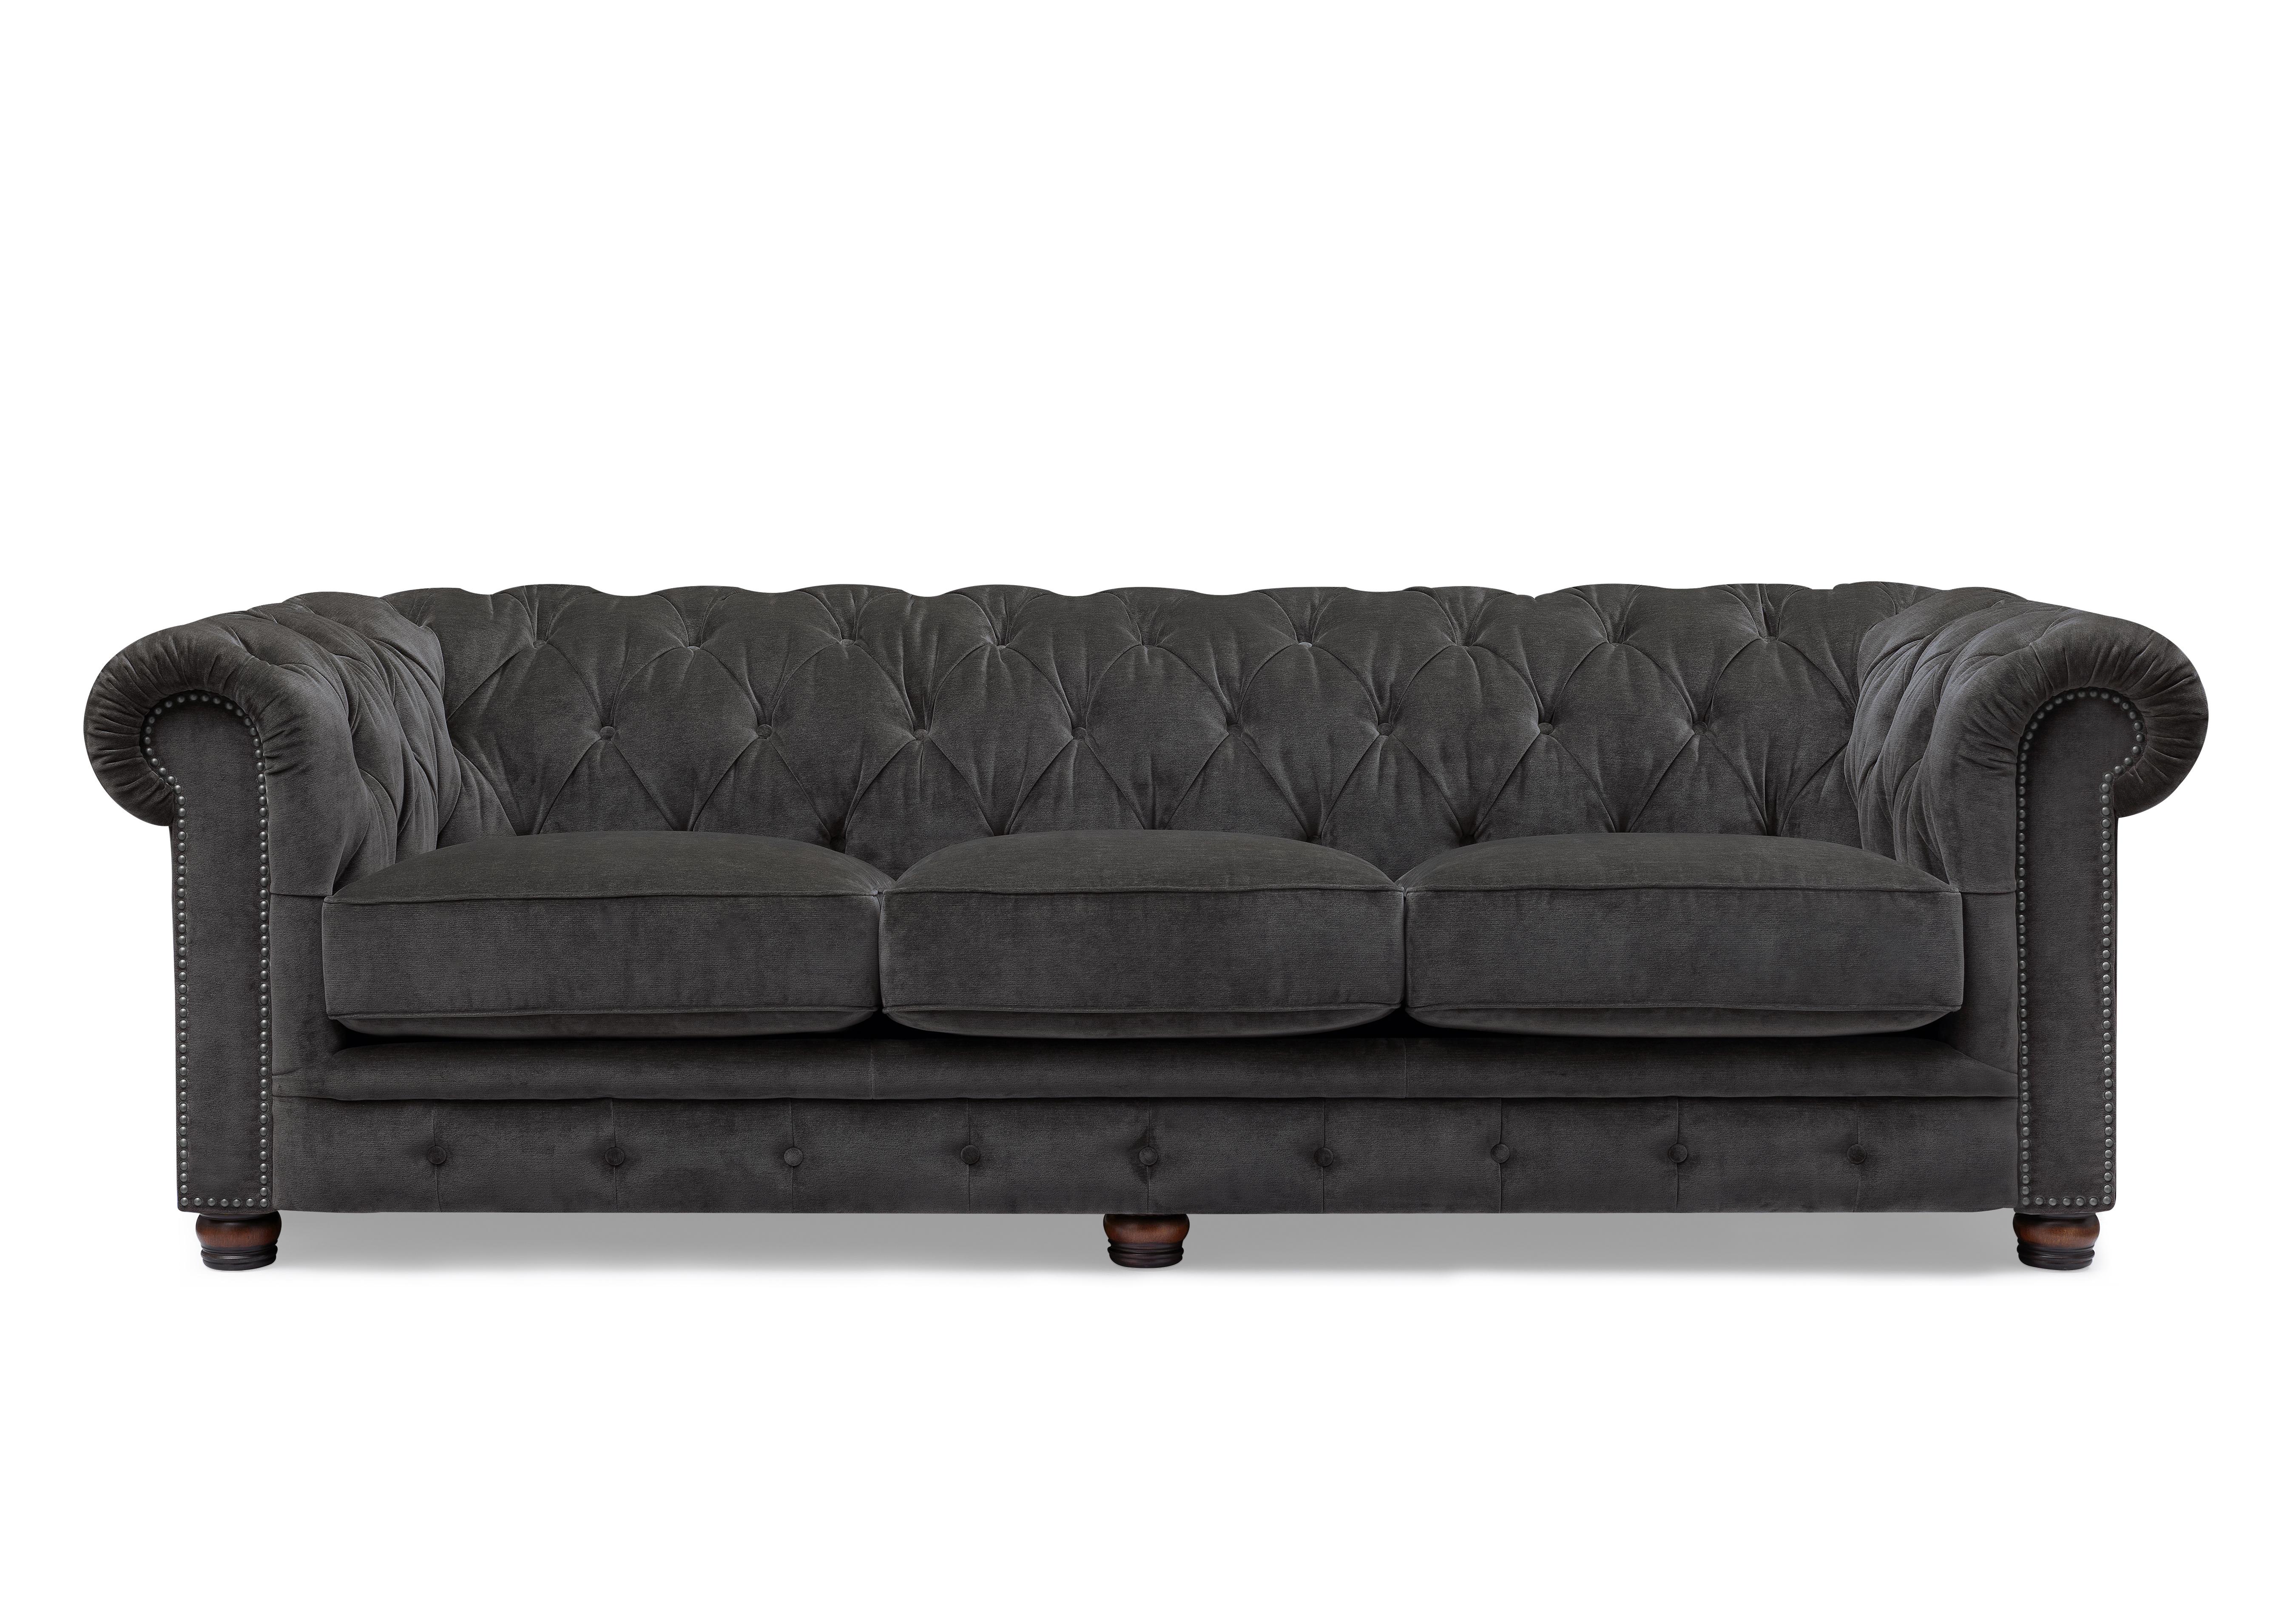 Shackleton 4 Seater Fabric Chesterfield Sofa with USB-C in X3y2-W021 Moonstone on Furniture Village